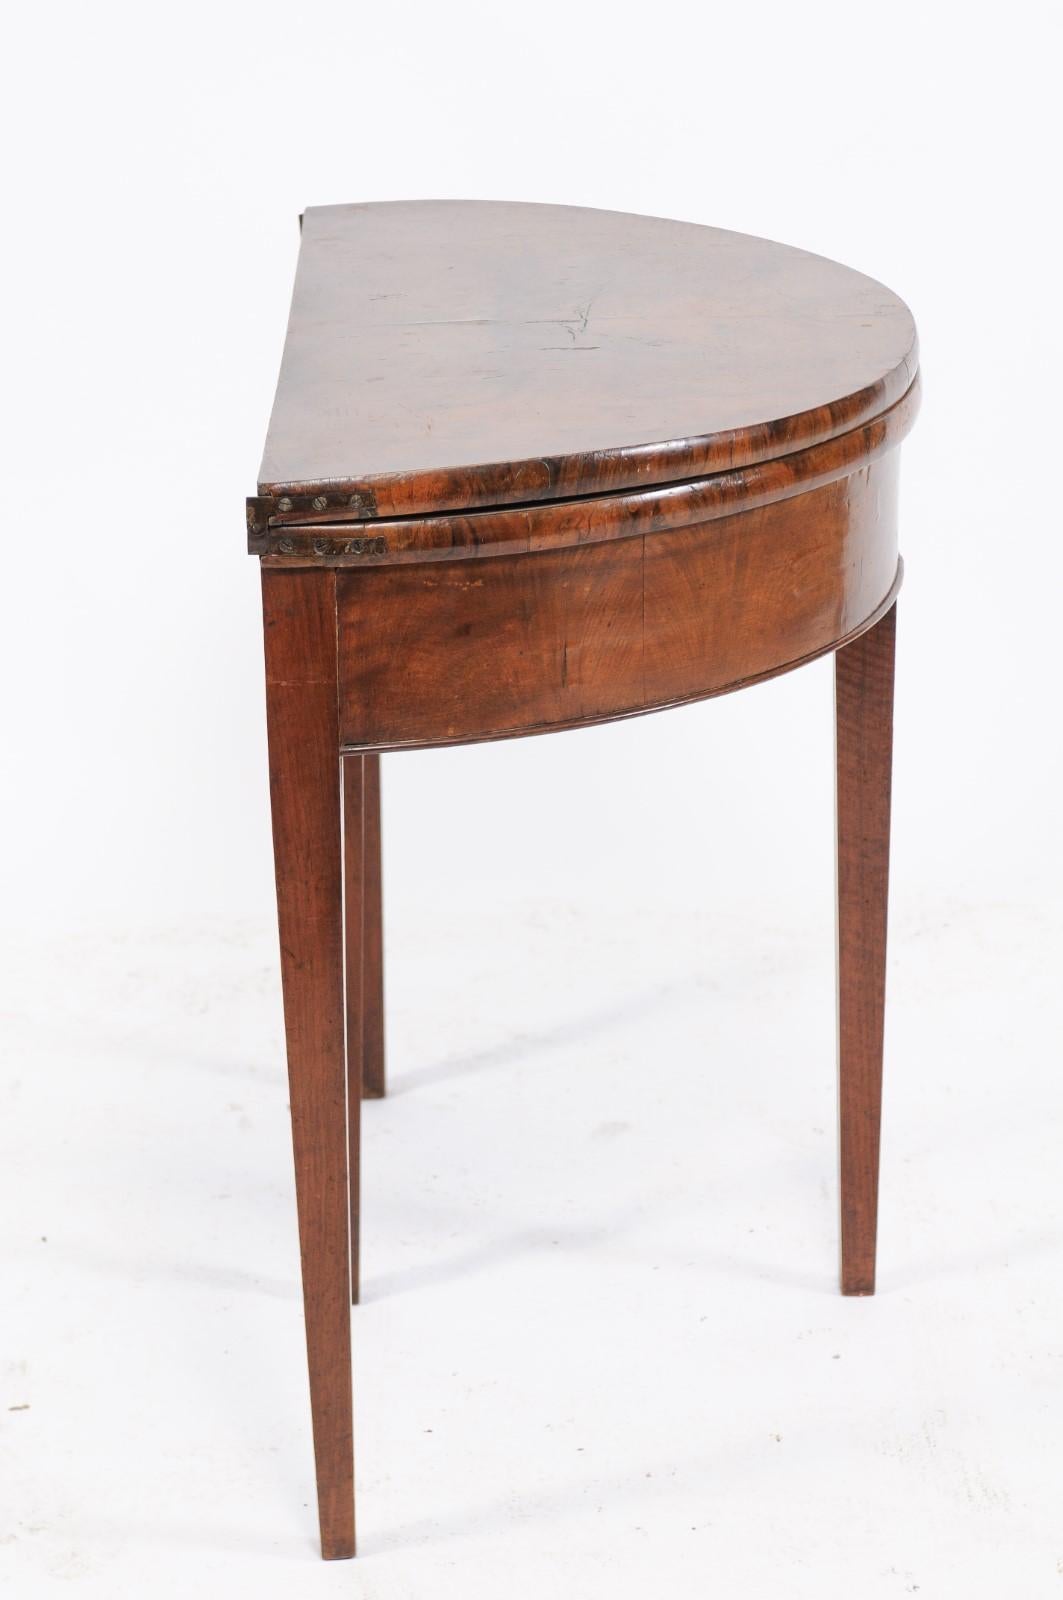 19th Century Directoire Style 1860s French Bookmarked Walnut Demilune Table with Leather Top